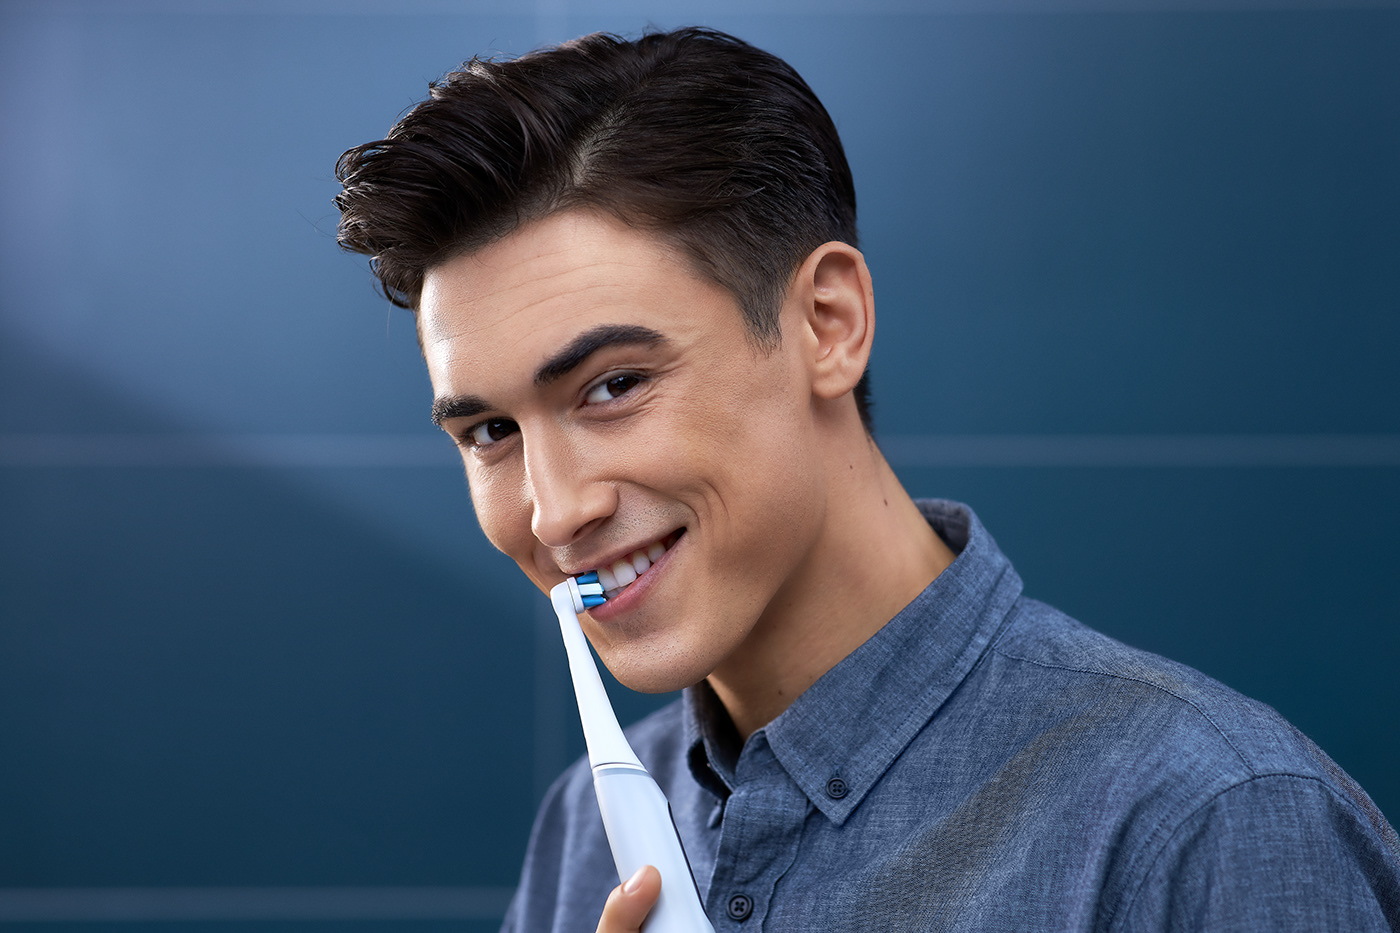 ads Advertising  campaign oral b Photography  product Product Photography toothbrush